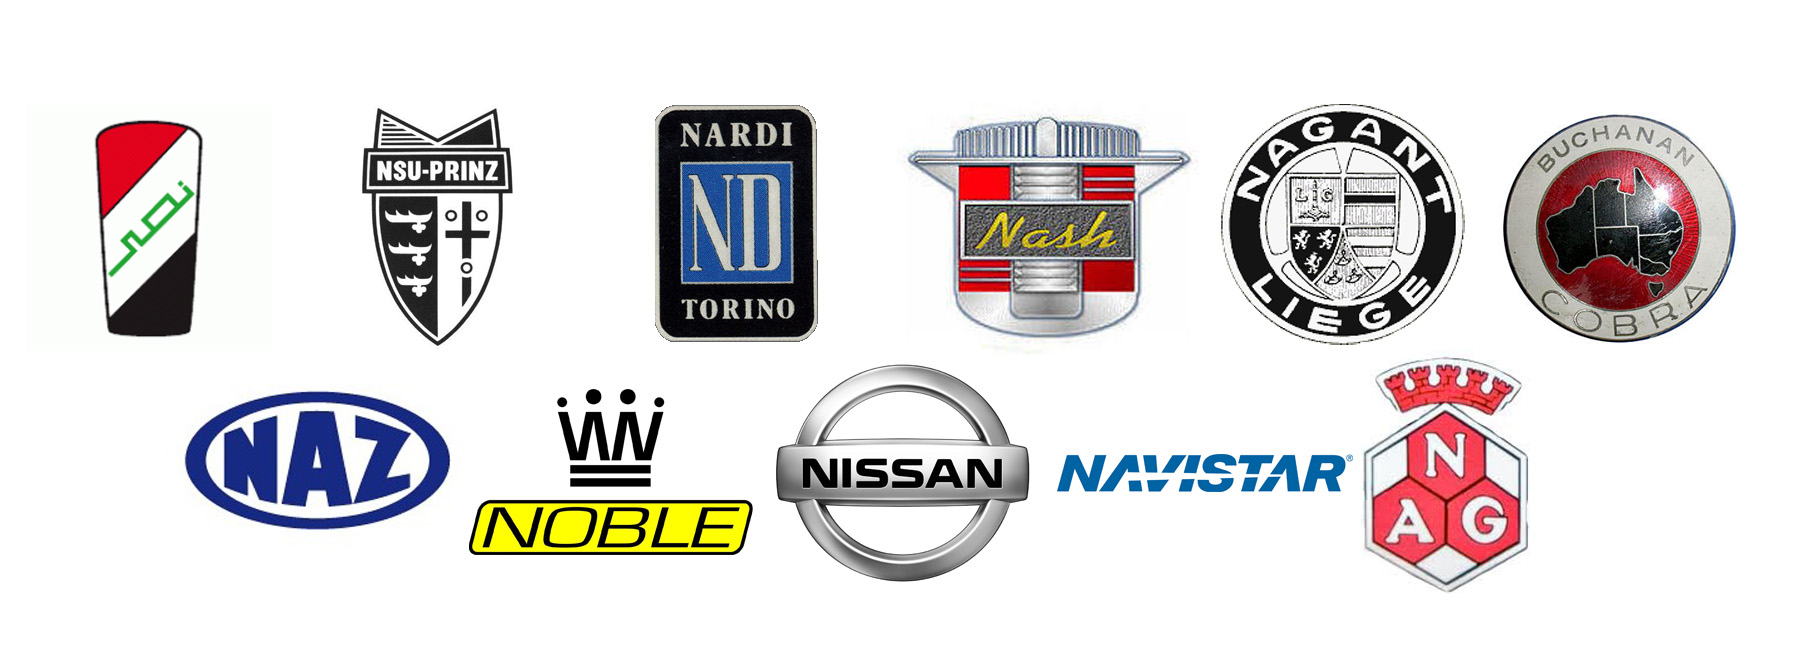 Car brands with A-Z [Car brands that start with A to Z]